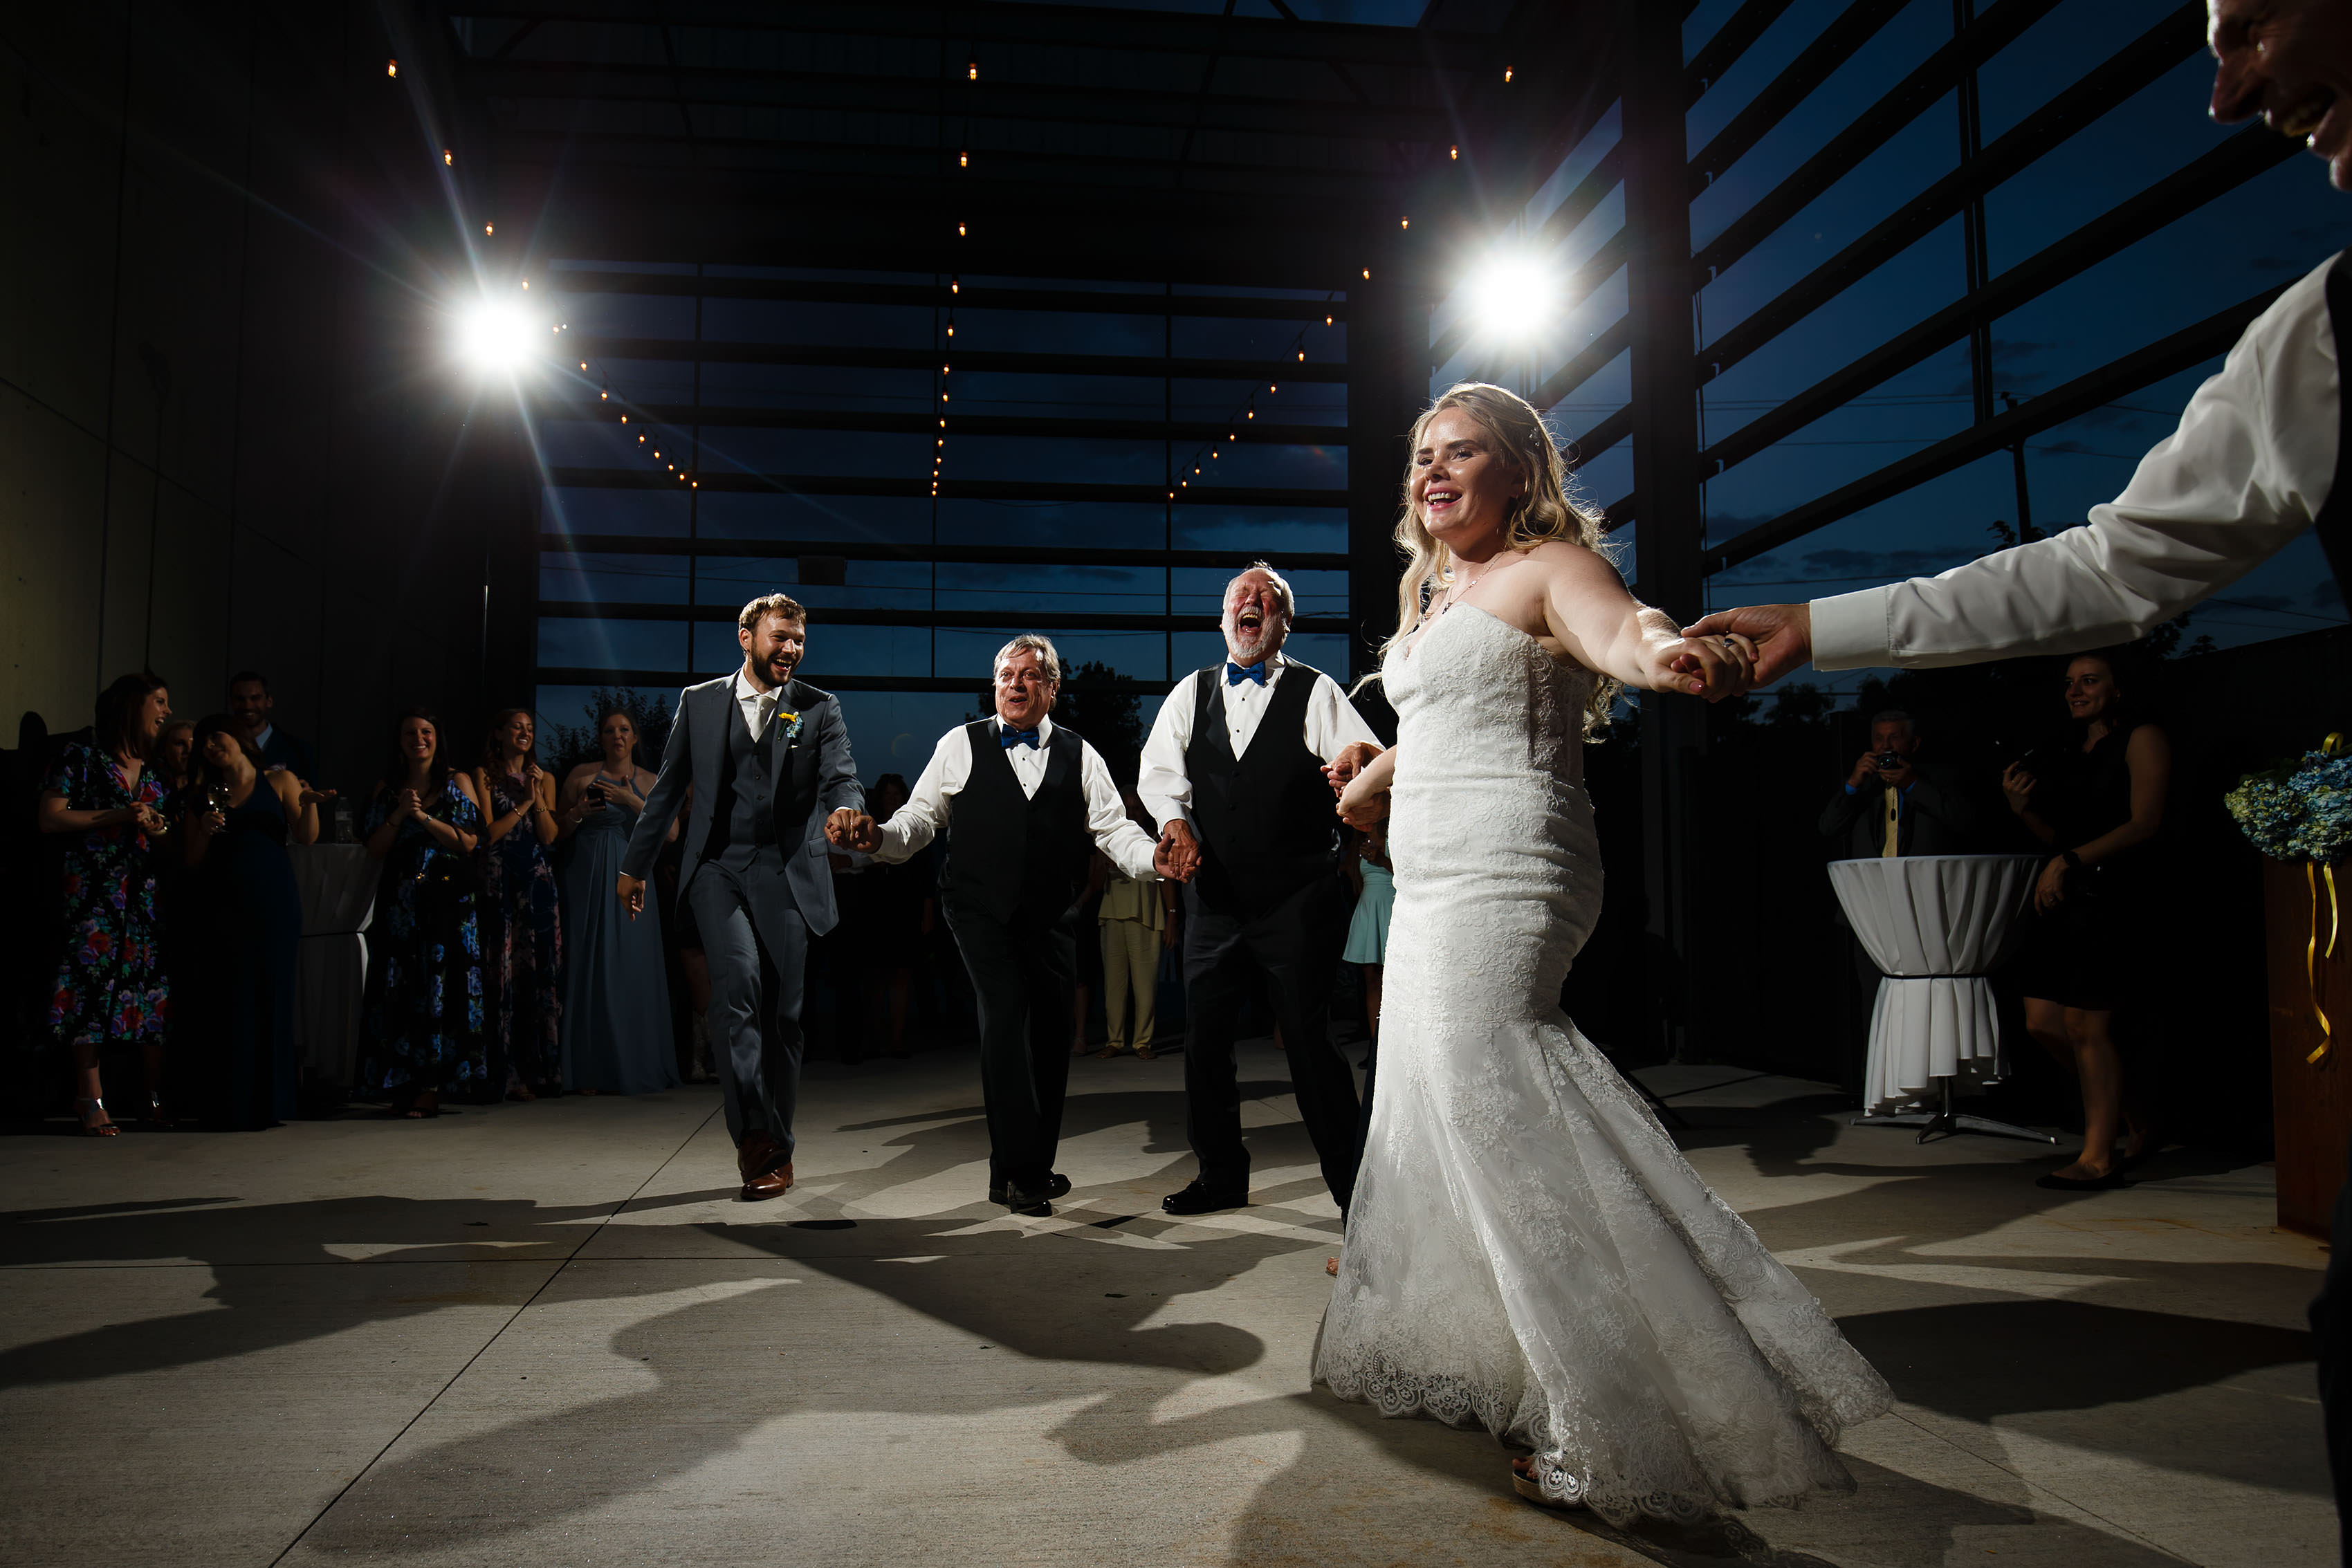 The bride and groom dance with their family during twilight at Space Gallery